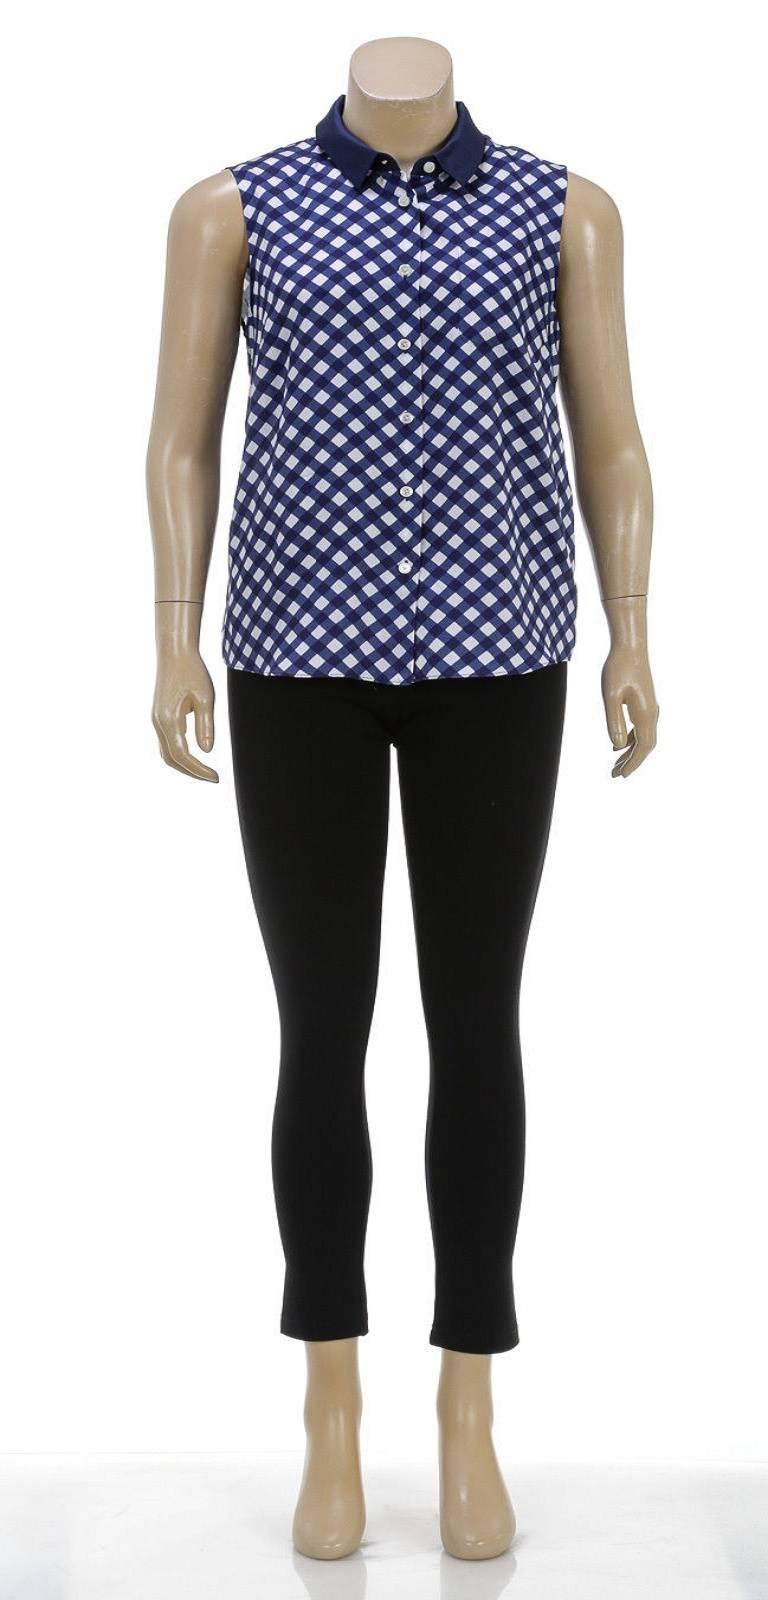 Kate Spade Blue and White Sleeveless Gingham Button Top (Size 8) In Good Condition For Sale In Corona Del Mar, CA